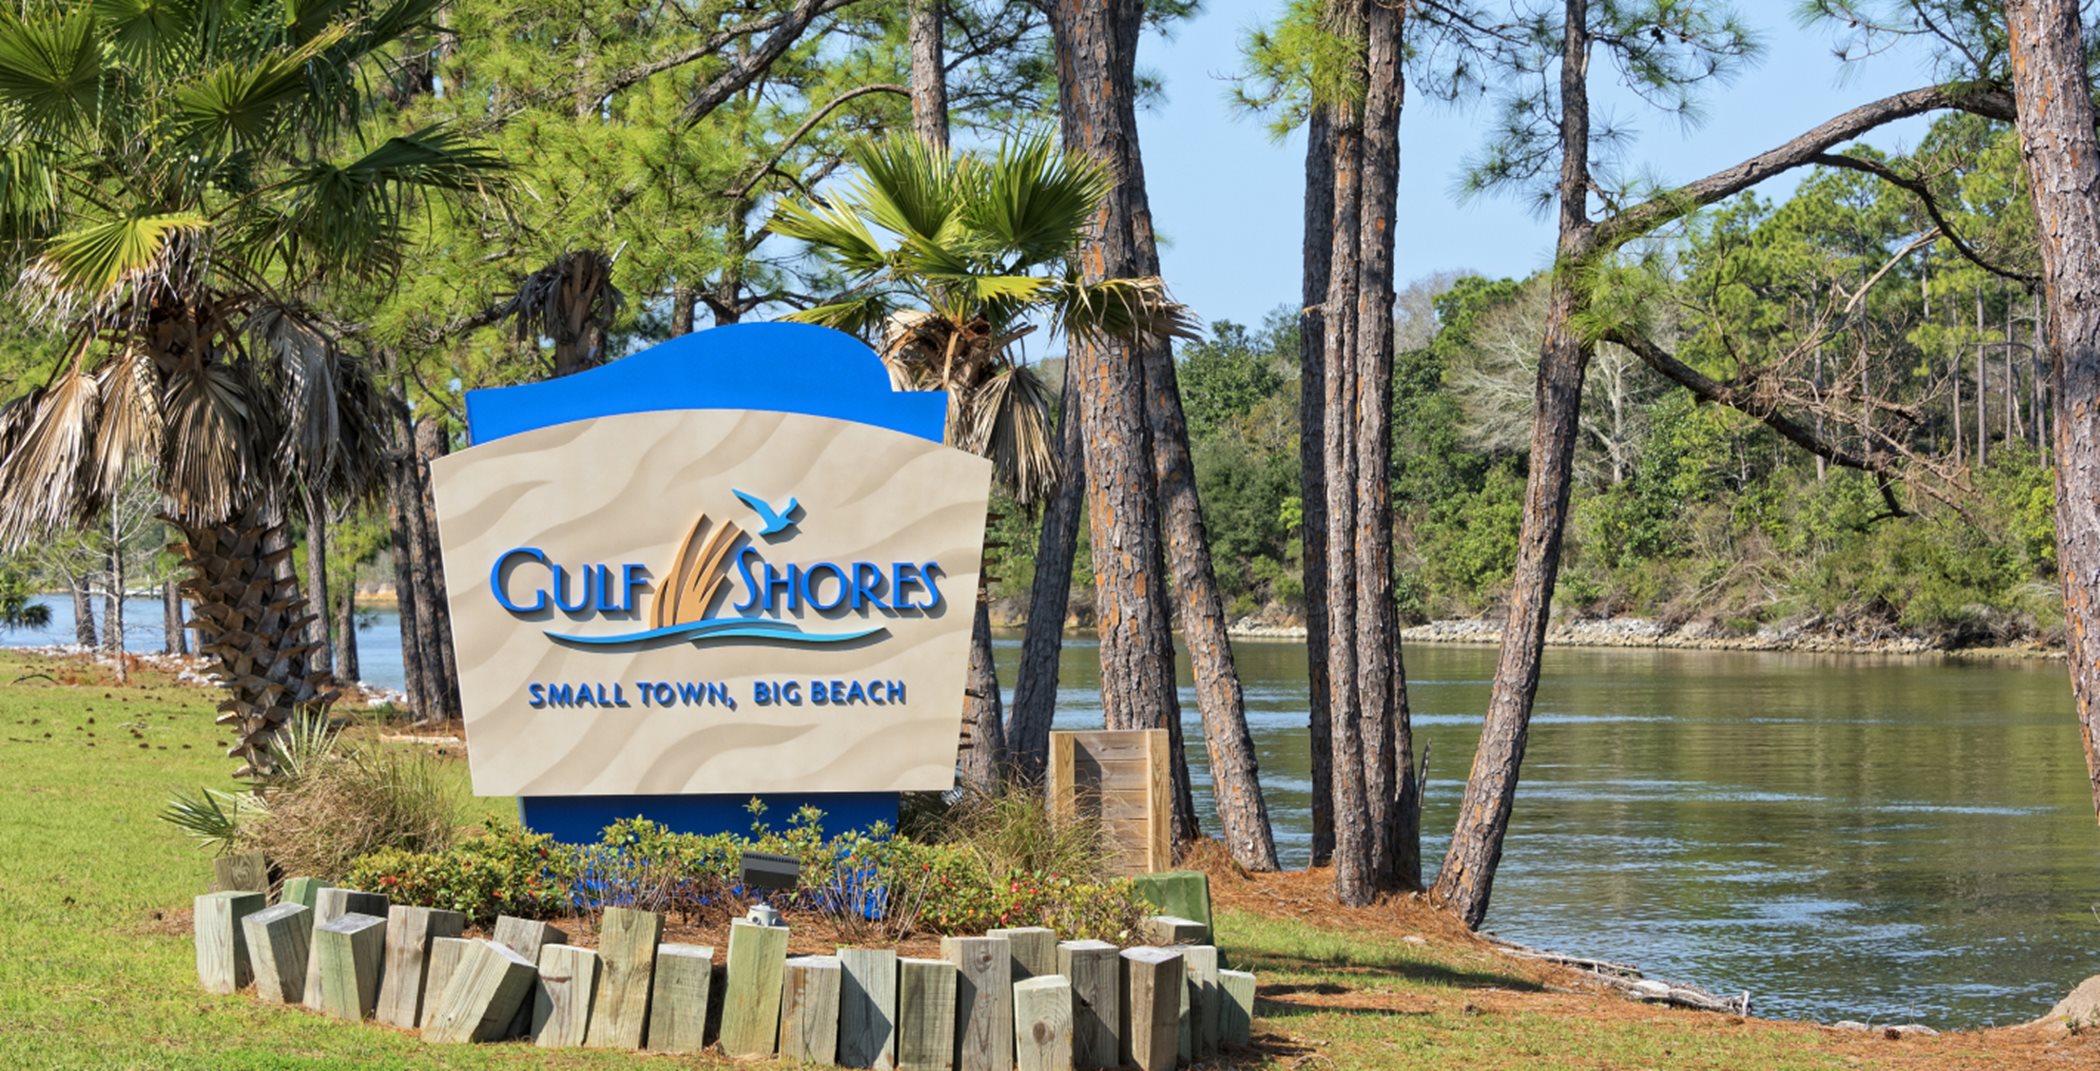 Entrance monument to Gulf Shores